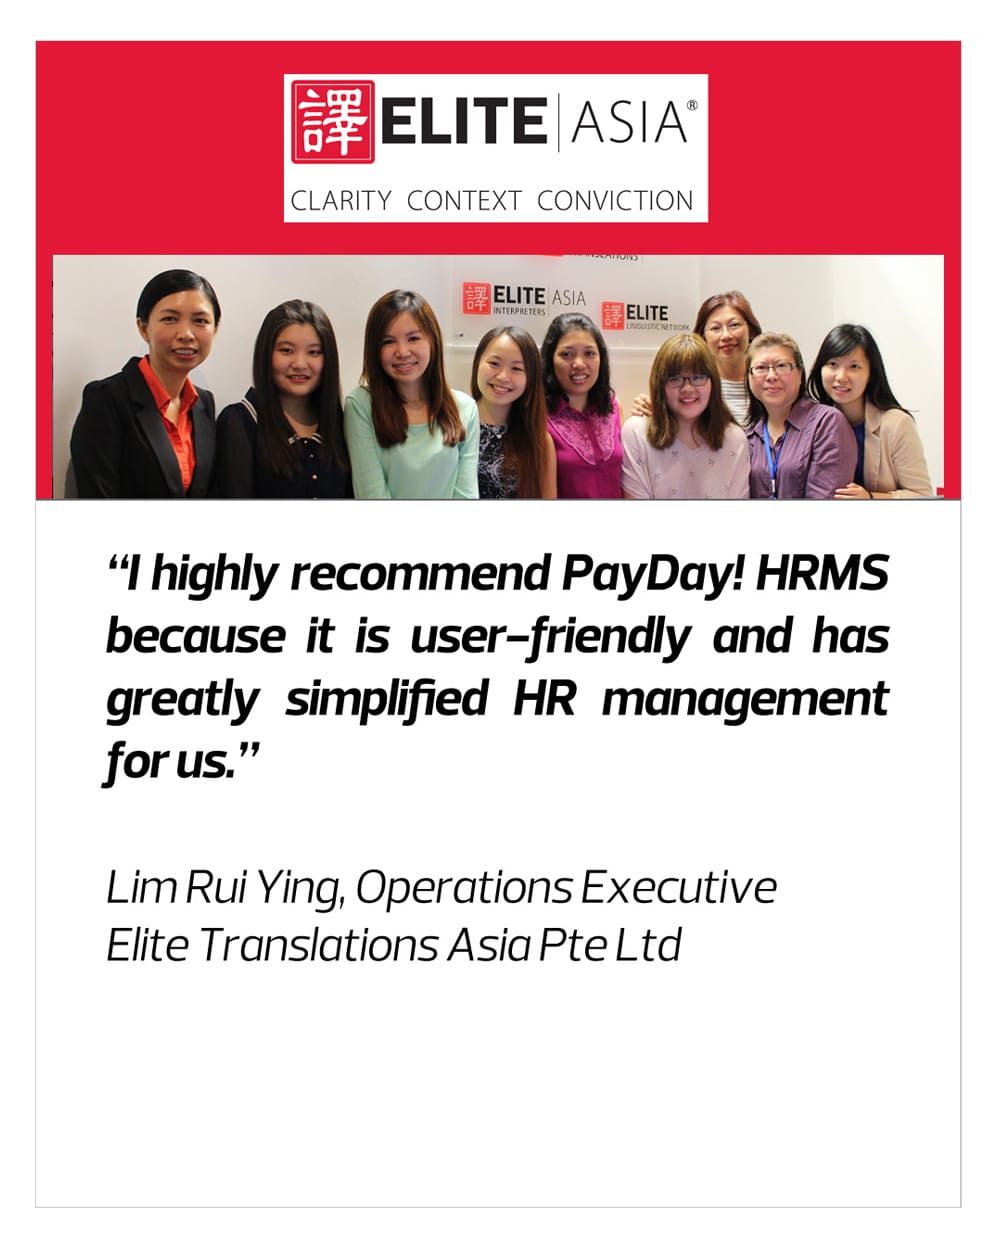 I highly recommend PayDay! HRMS because it is user-friendly and has greatly simplified HR management for us- Elite Asia Translation.